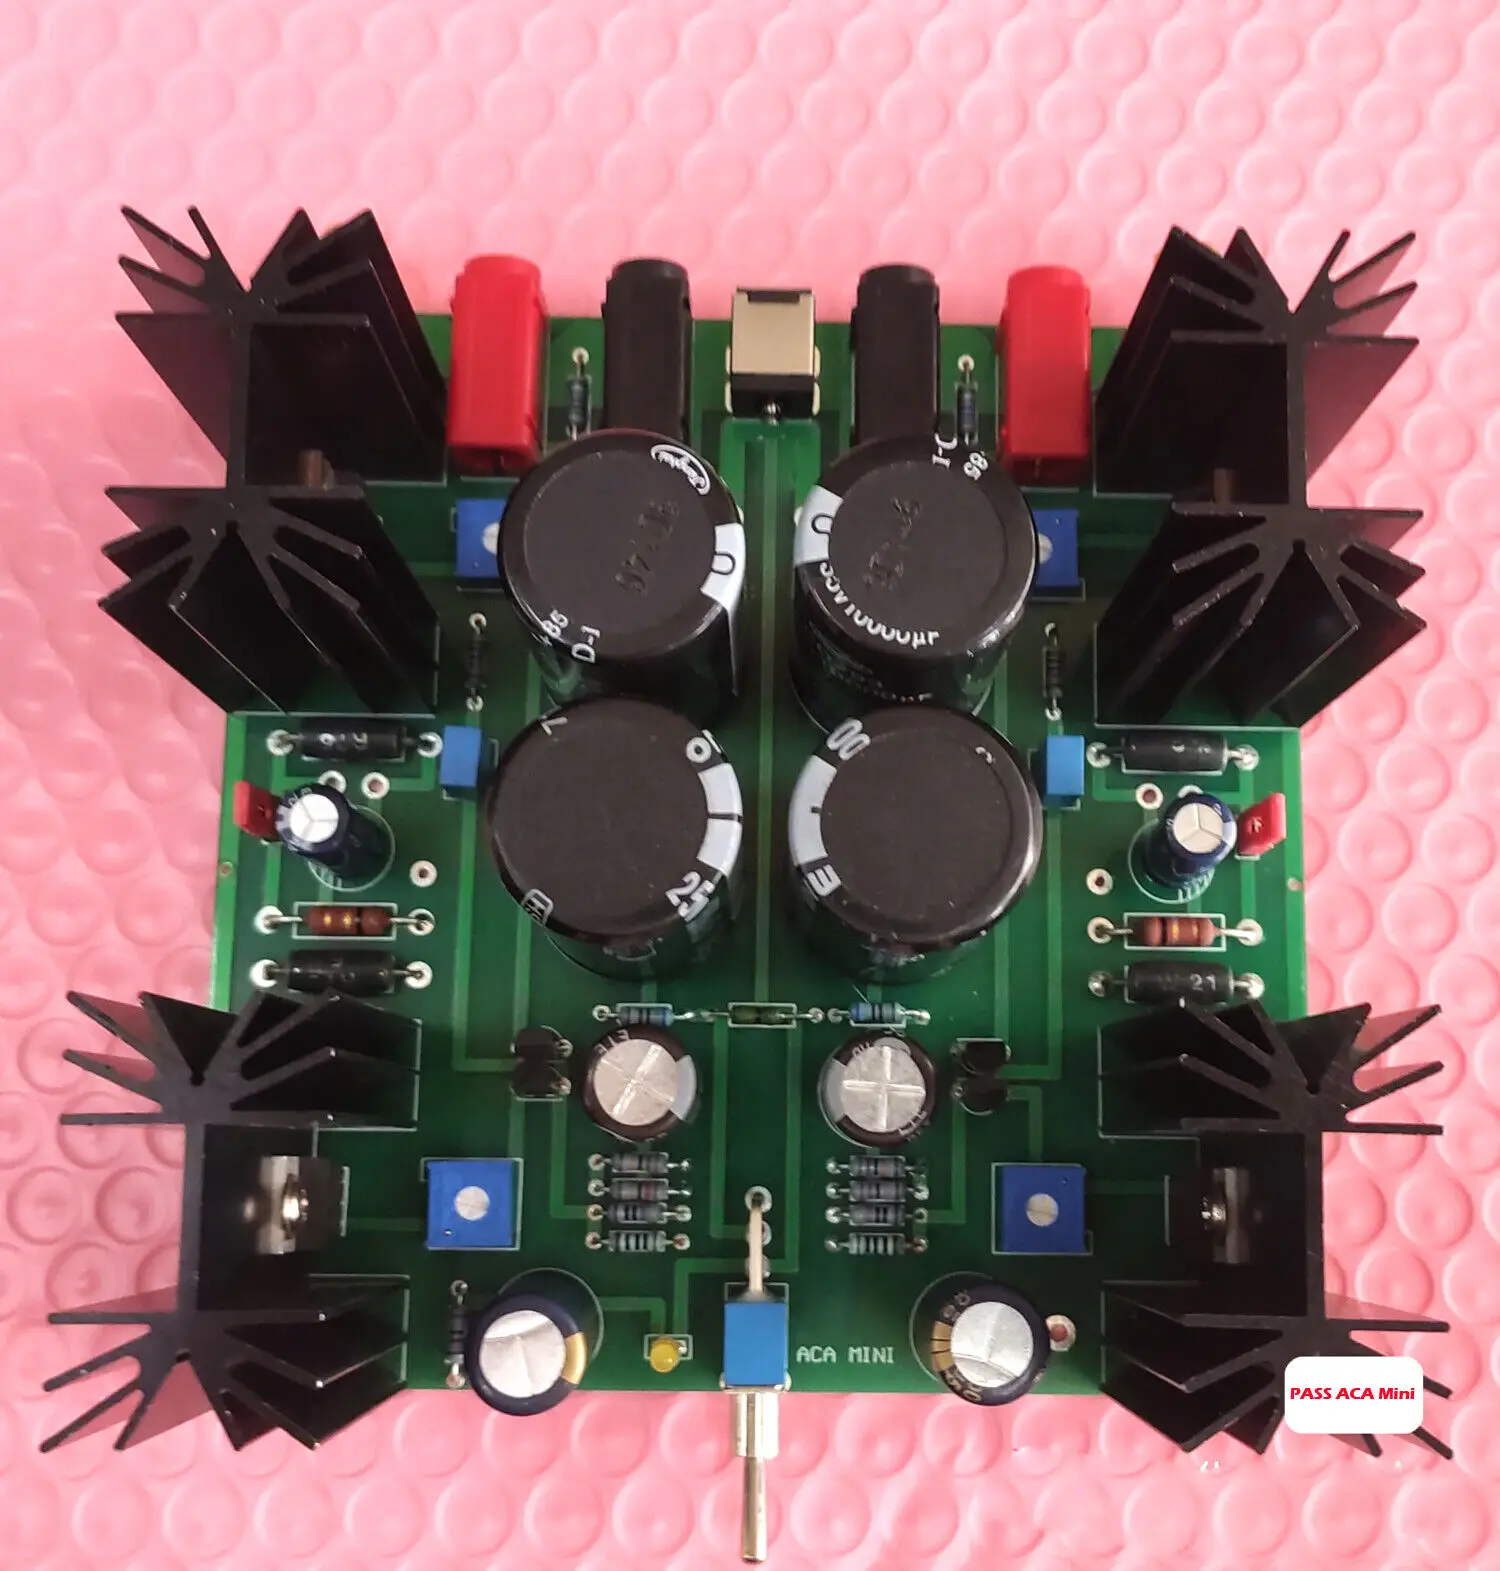 Assembled 5W + 5W Pure Class A Power Amp Board Base On Pass Labs ACA Amplifier